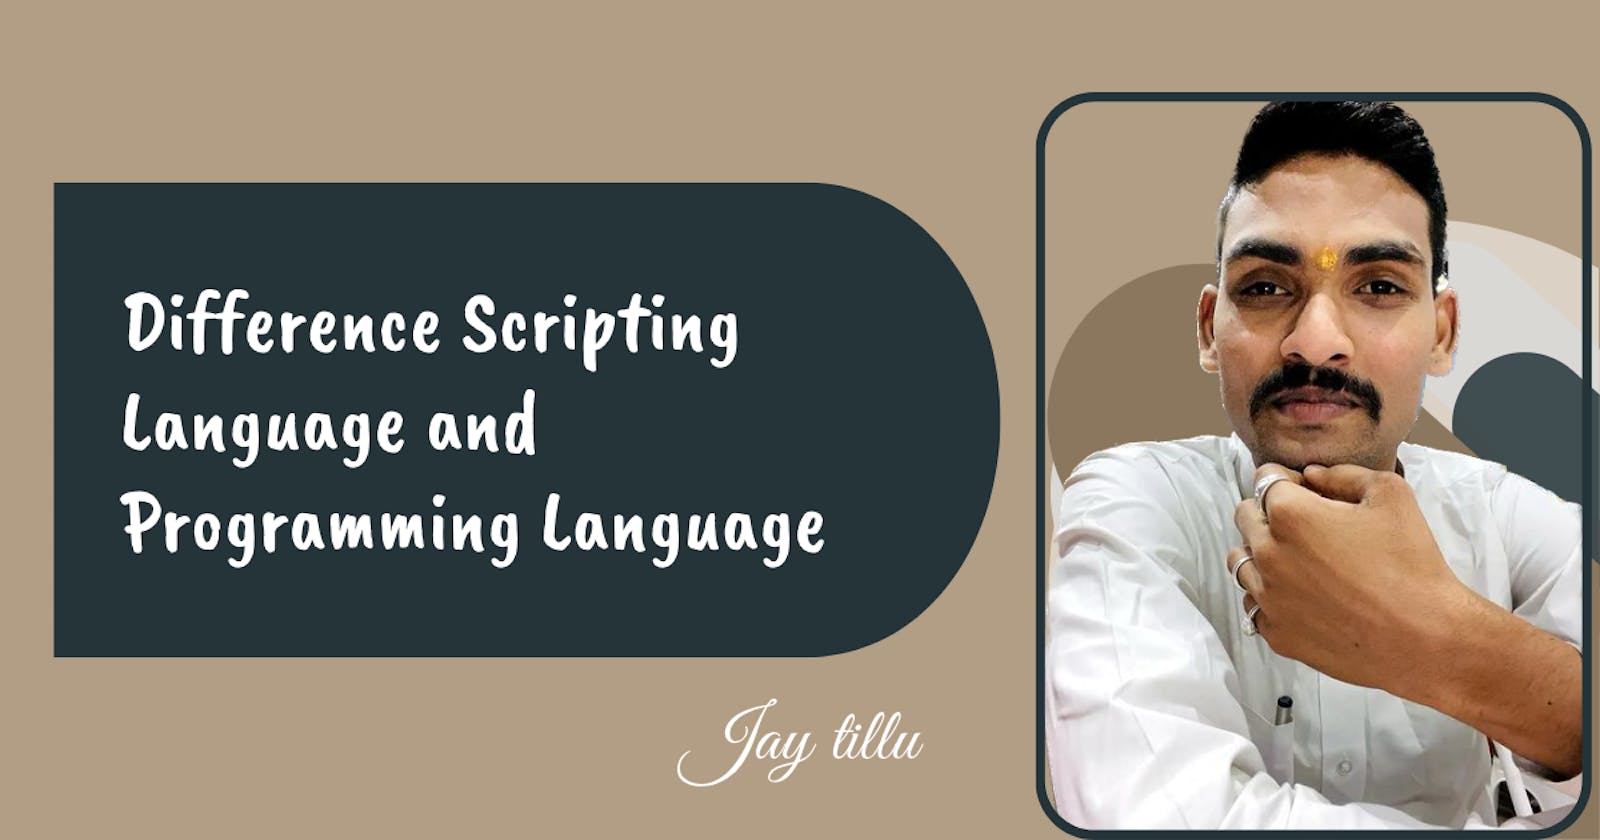 What is the Difference between Scripting Language and Programming Language?